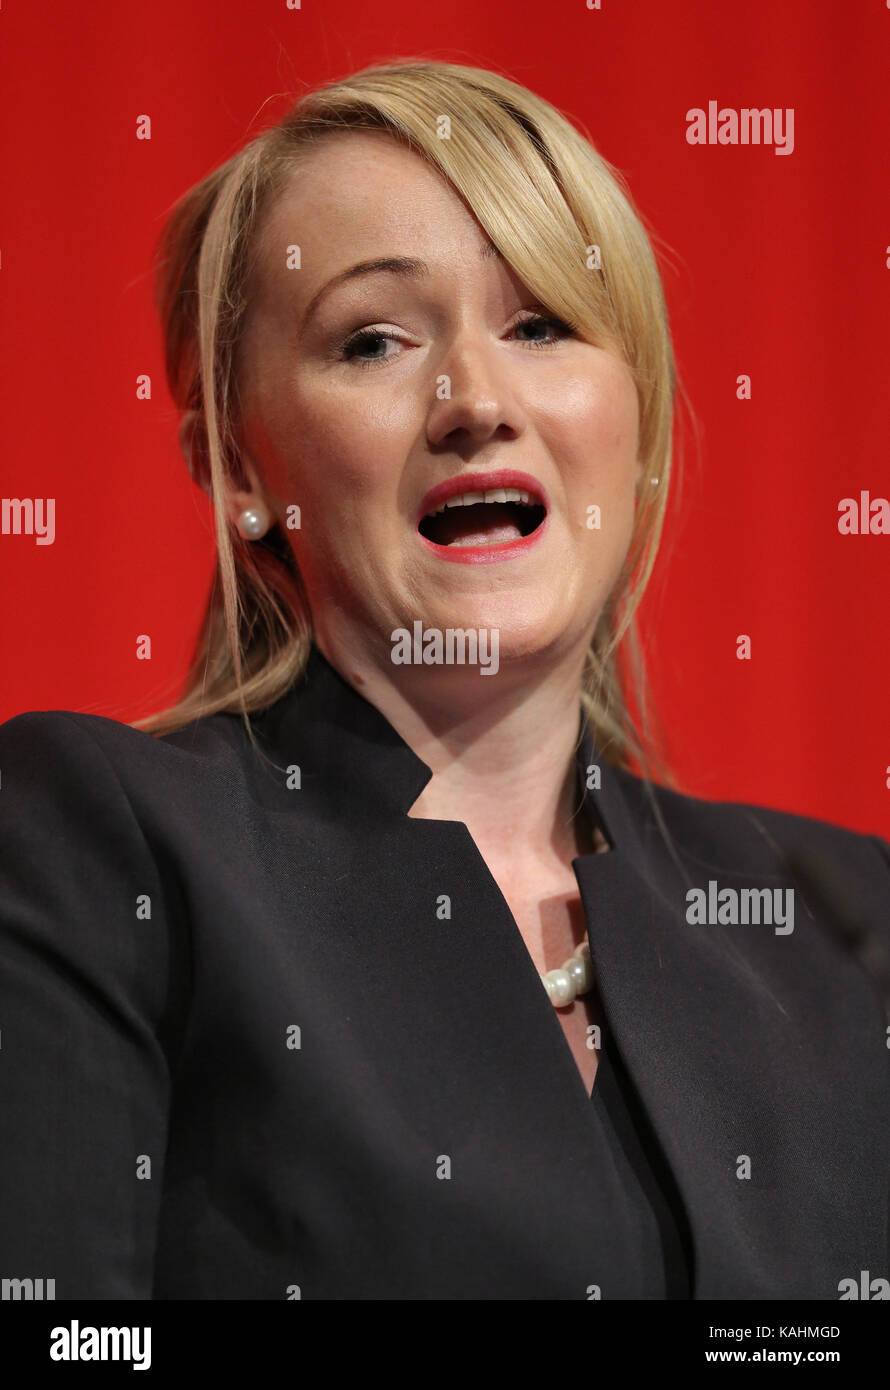 Brighton, UK. 26th September, 2017. Rebecca Long Bailey Mp Shadow Secretary Of State For Business Labour Party Conference 2017 The Brighton Centre, Brighton, England 26 September 2017 Addresses The Labour Party Conference 2017 At The Brighton Centre, Brighton, England Credit: Allstar Picture Library/Alamy Live News Stock Photo